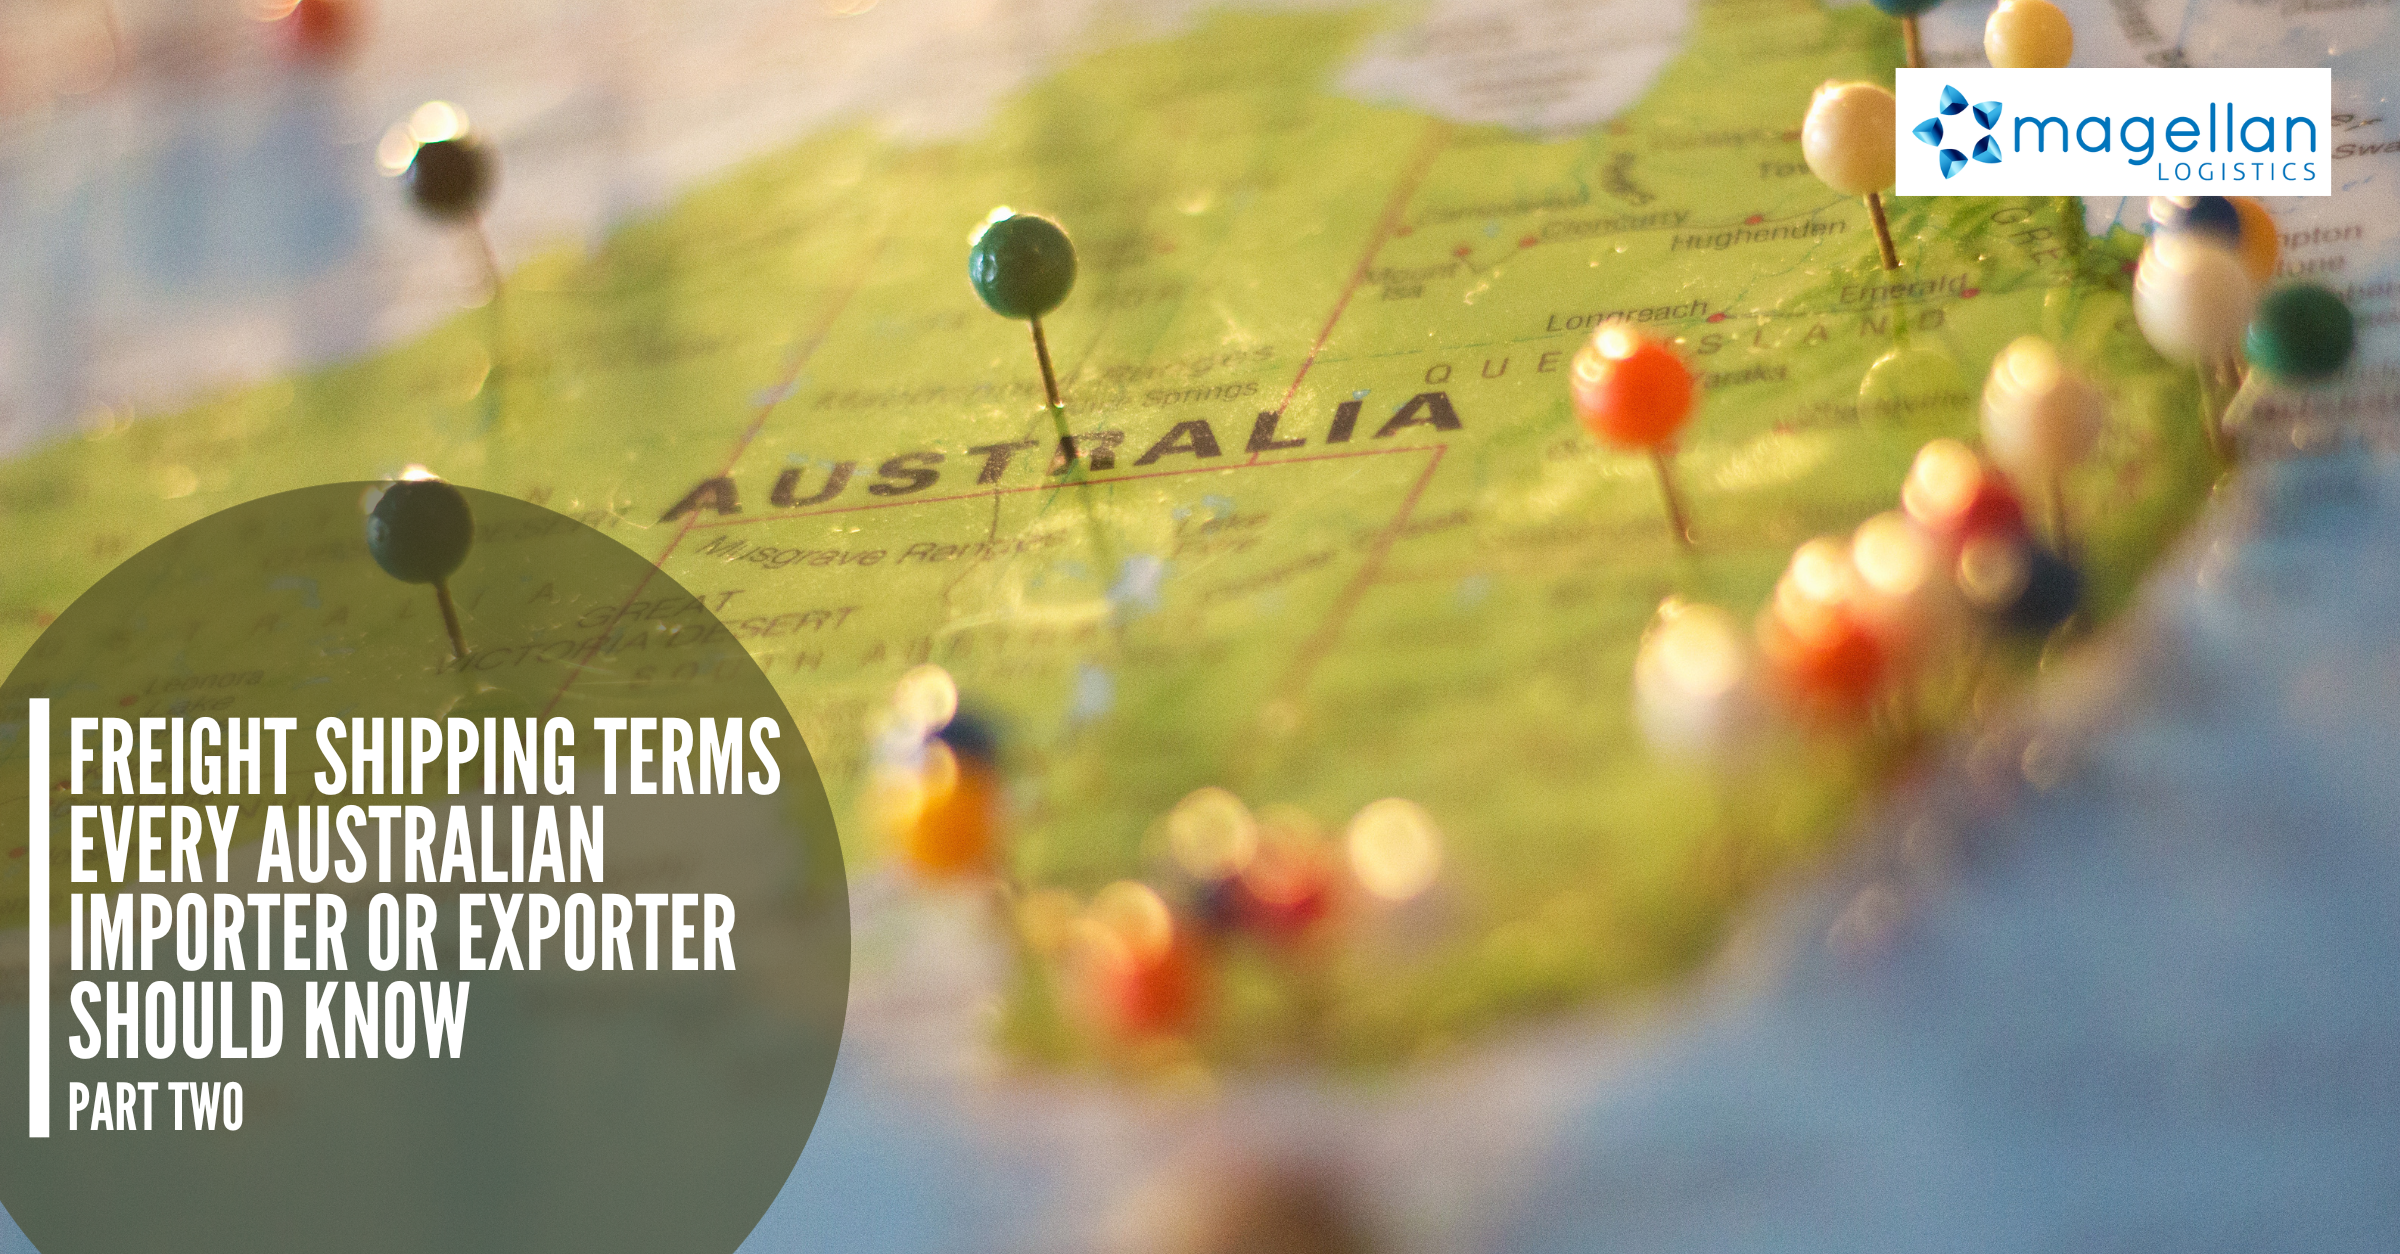 Freight Shipping Terms - image of a map of Australia with push pins at some locations